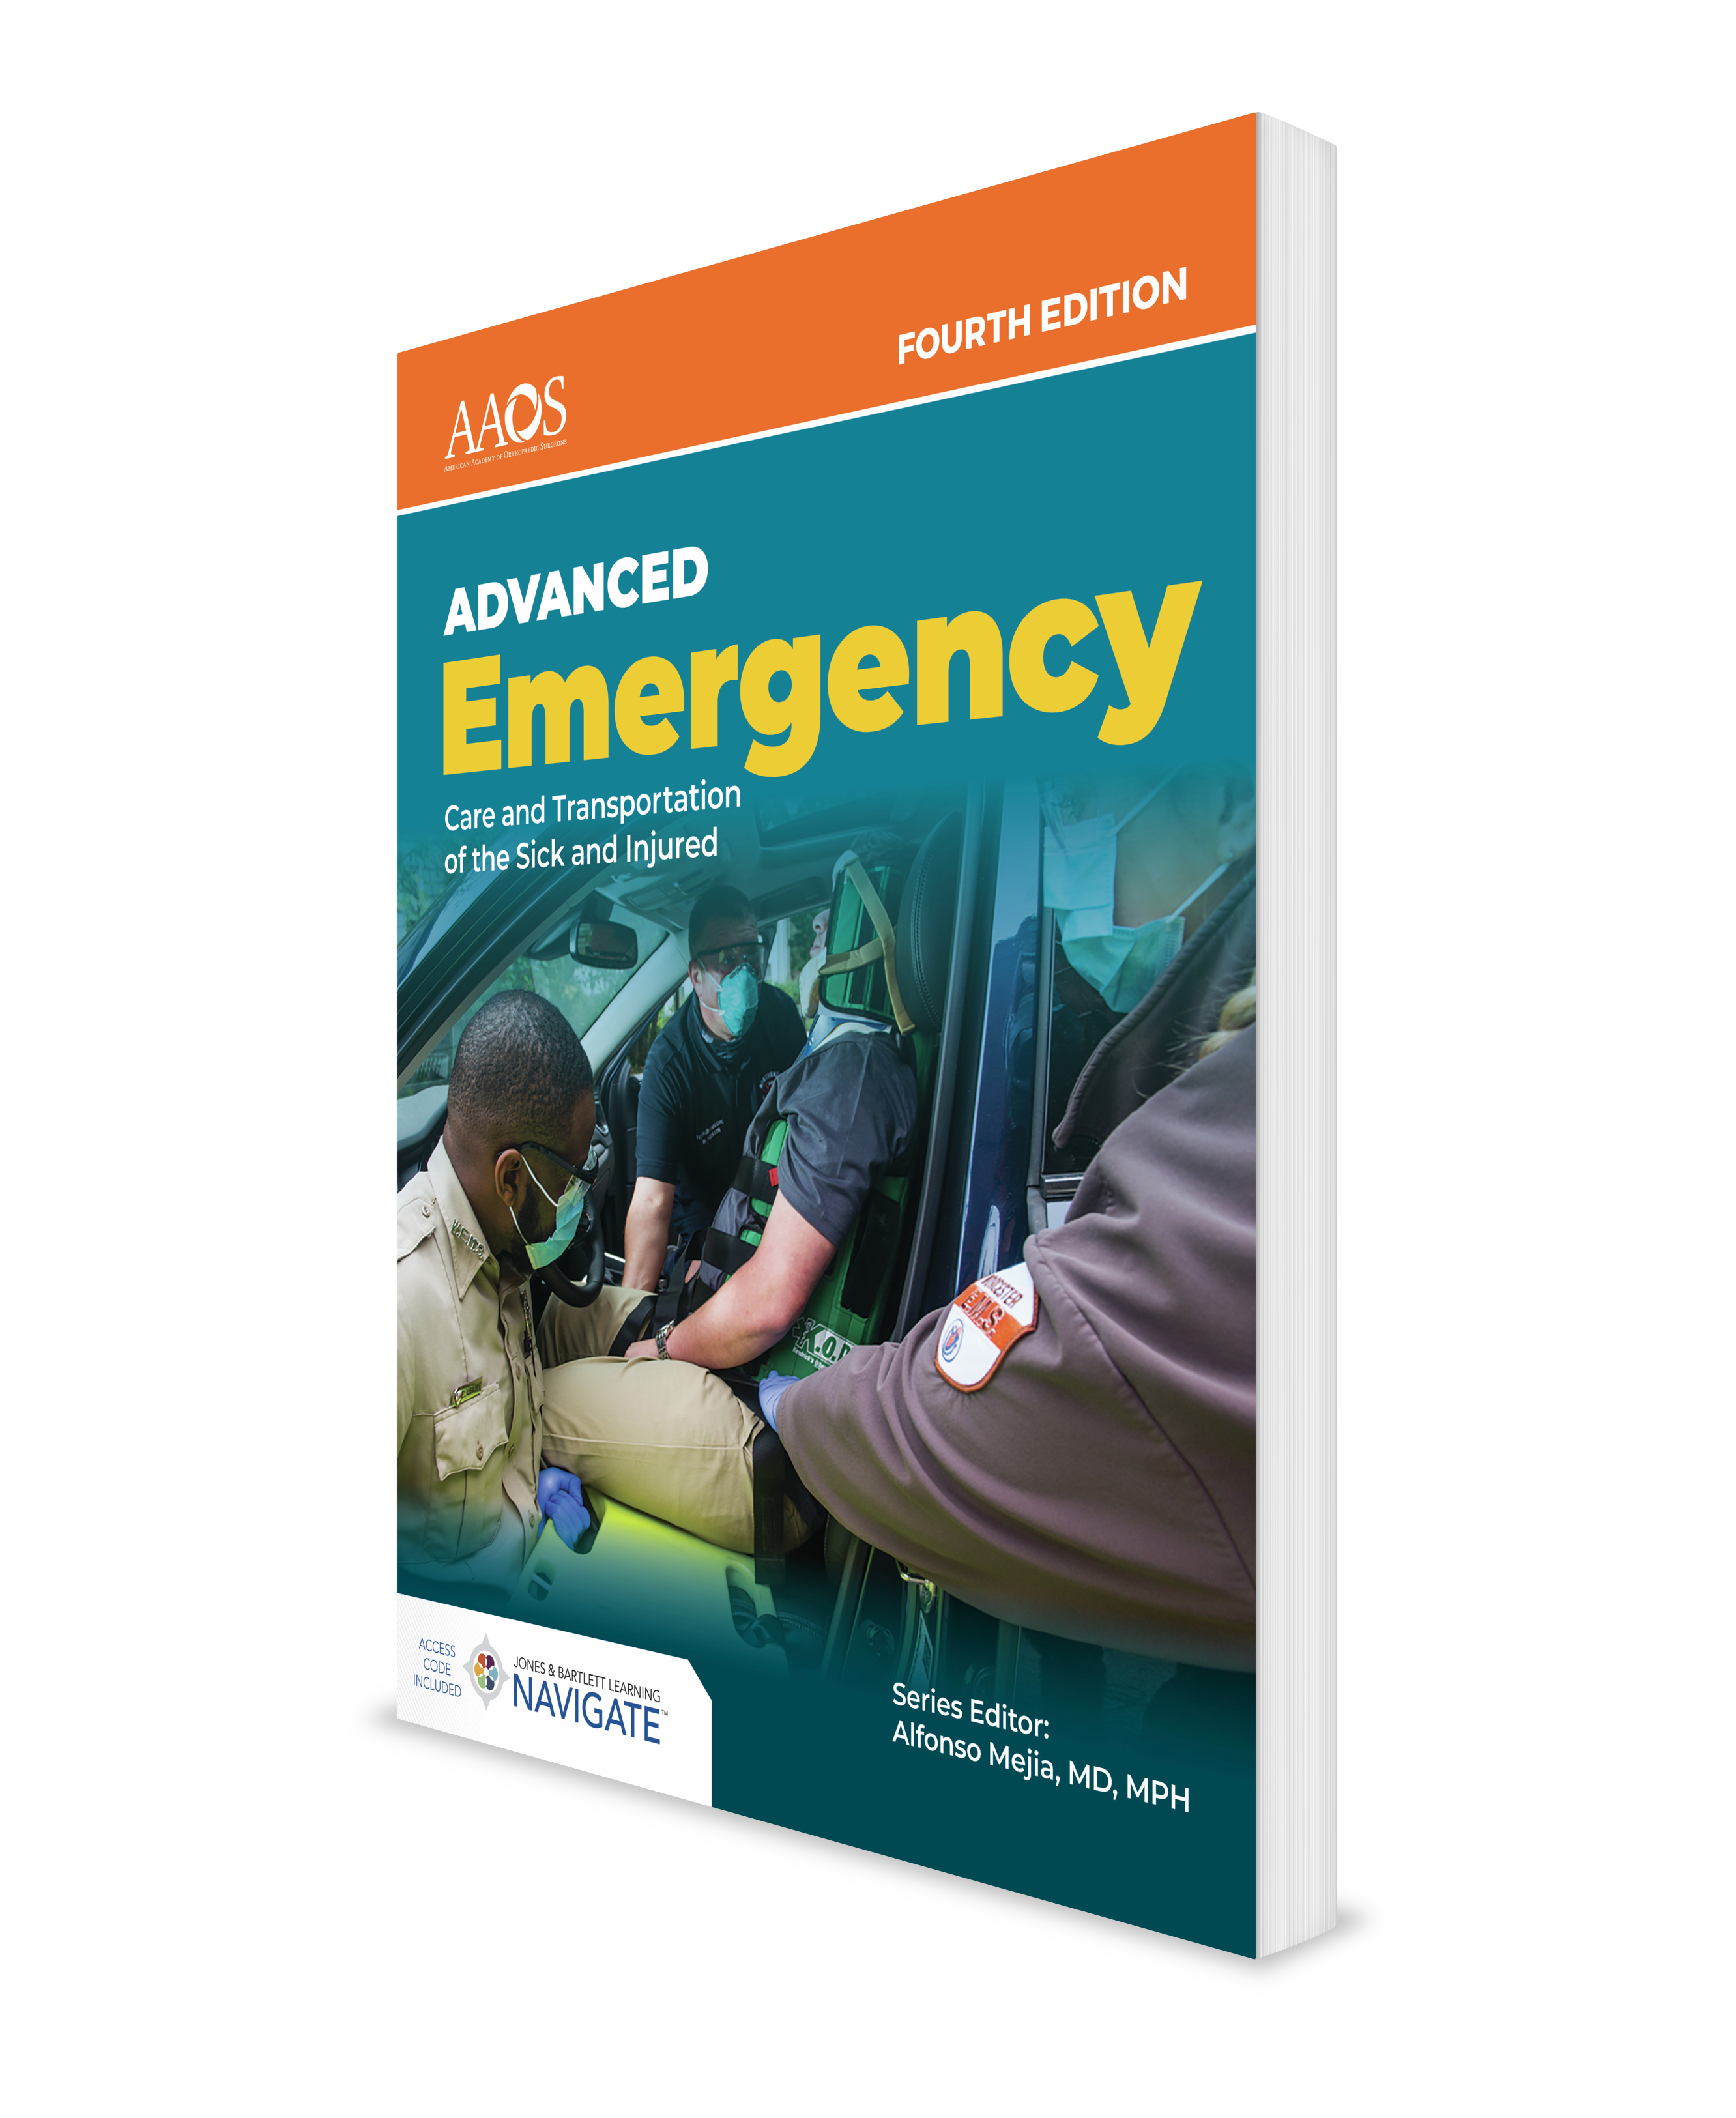 Emergency Training Associates Limited Launches New Collection of Emergency Care and First Responders’ Training Books and Online Courses